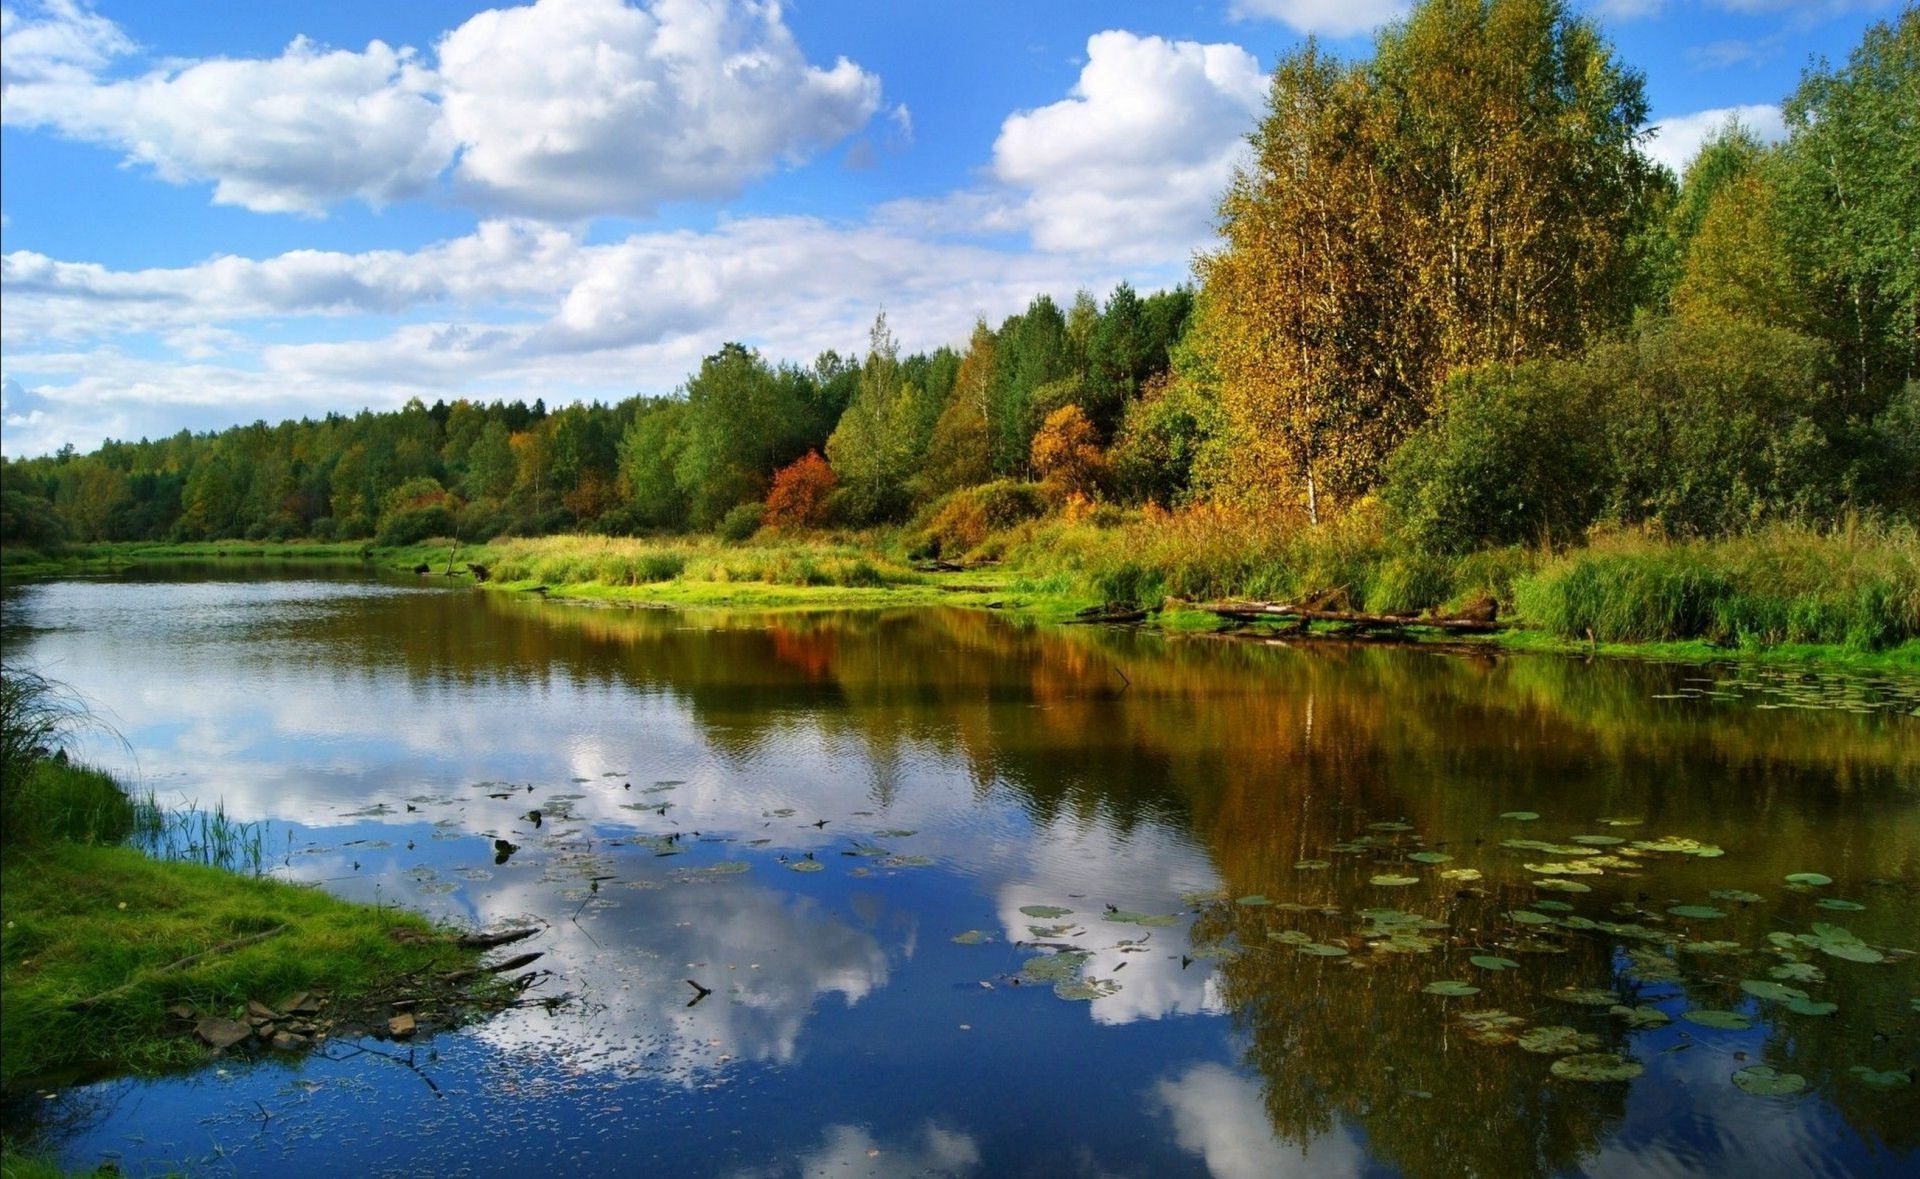 rivers ponds and streams lake water reflection landscape nature river outdoors tree pool scenic wood sky composure placid summer idyllic daylight